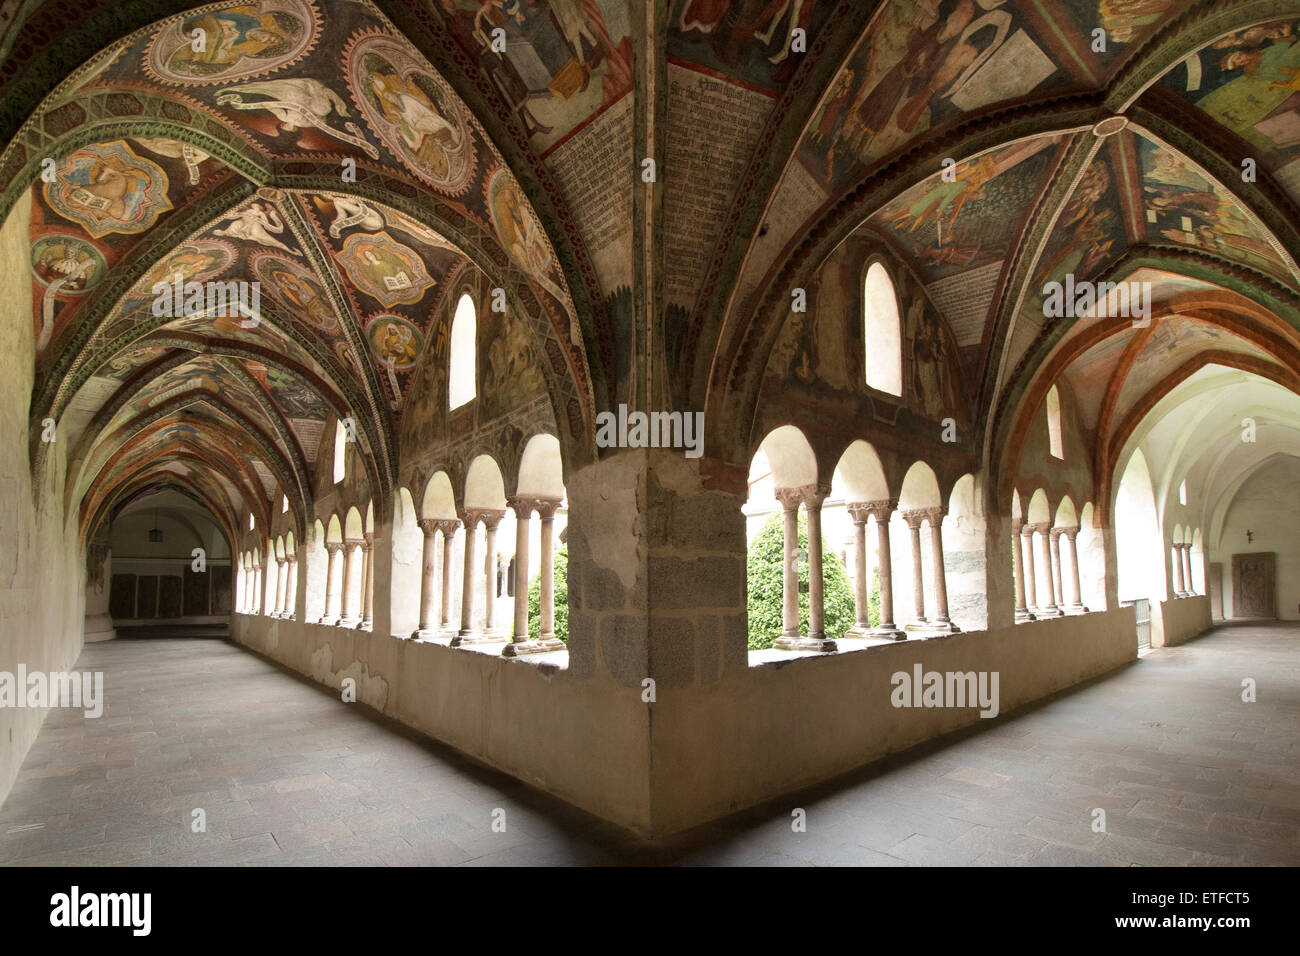 Cathedral cloister, arcades and vaults with frescoes, Brixen, South Tyrol, Italy Stock Photo